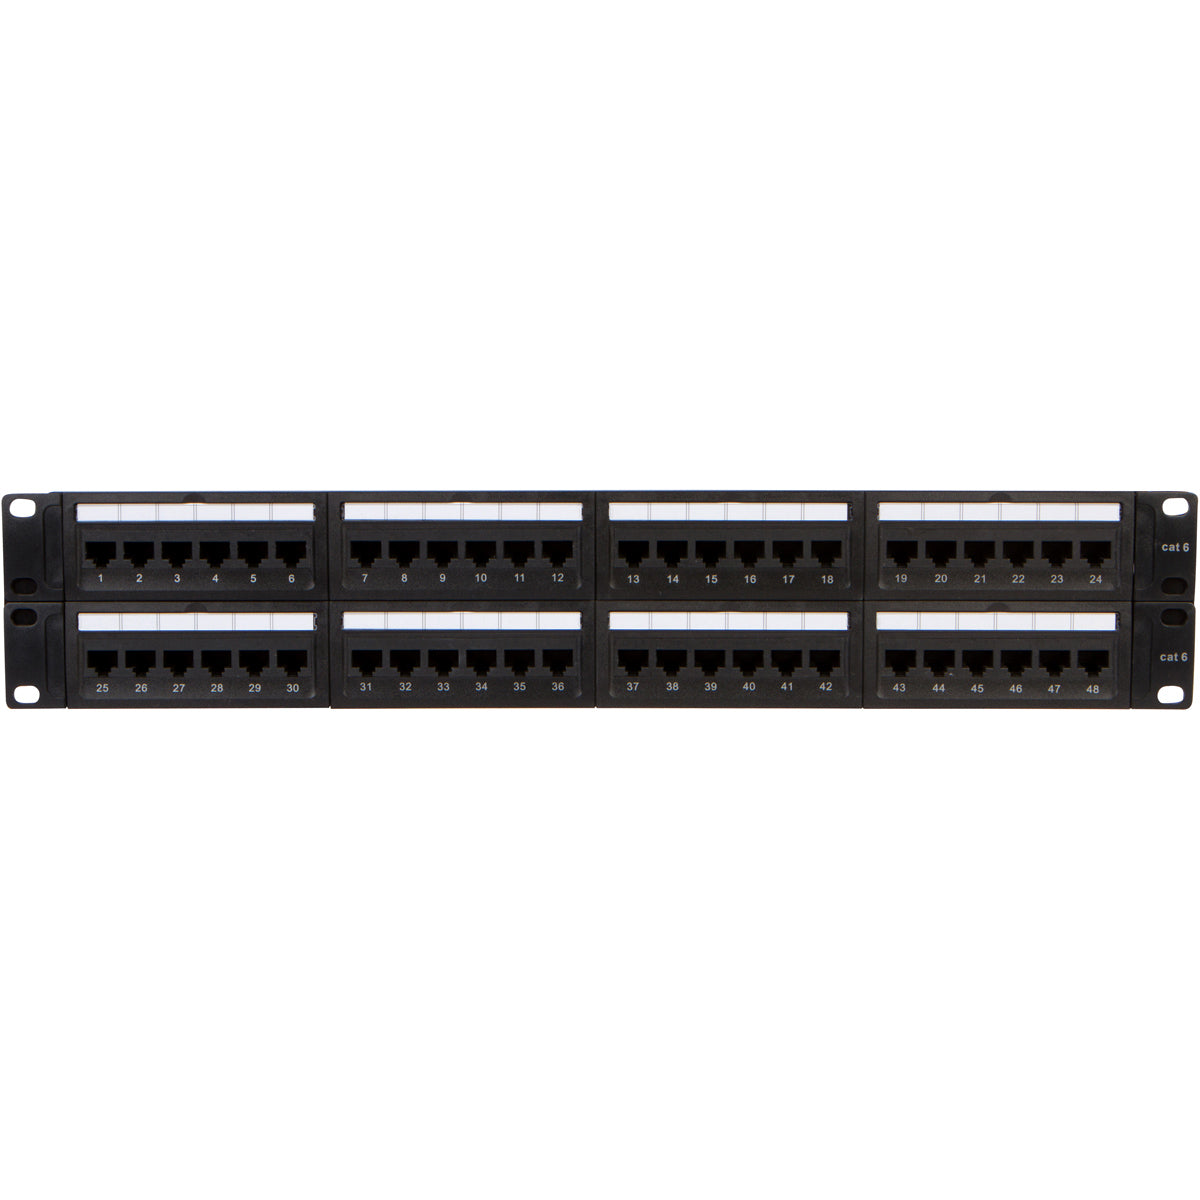 48 Port Cat6 Patch Panel with Punch Down Tool and Cable Management System (1, 48 Port) - Milena International Inc